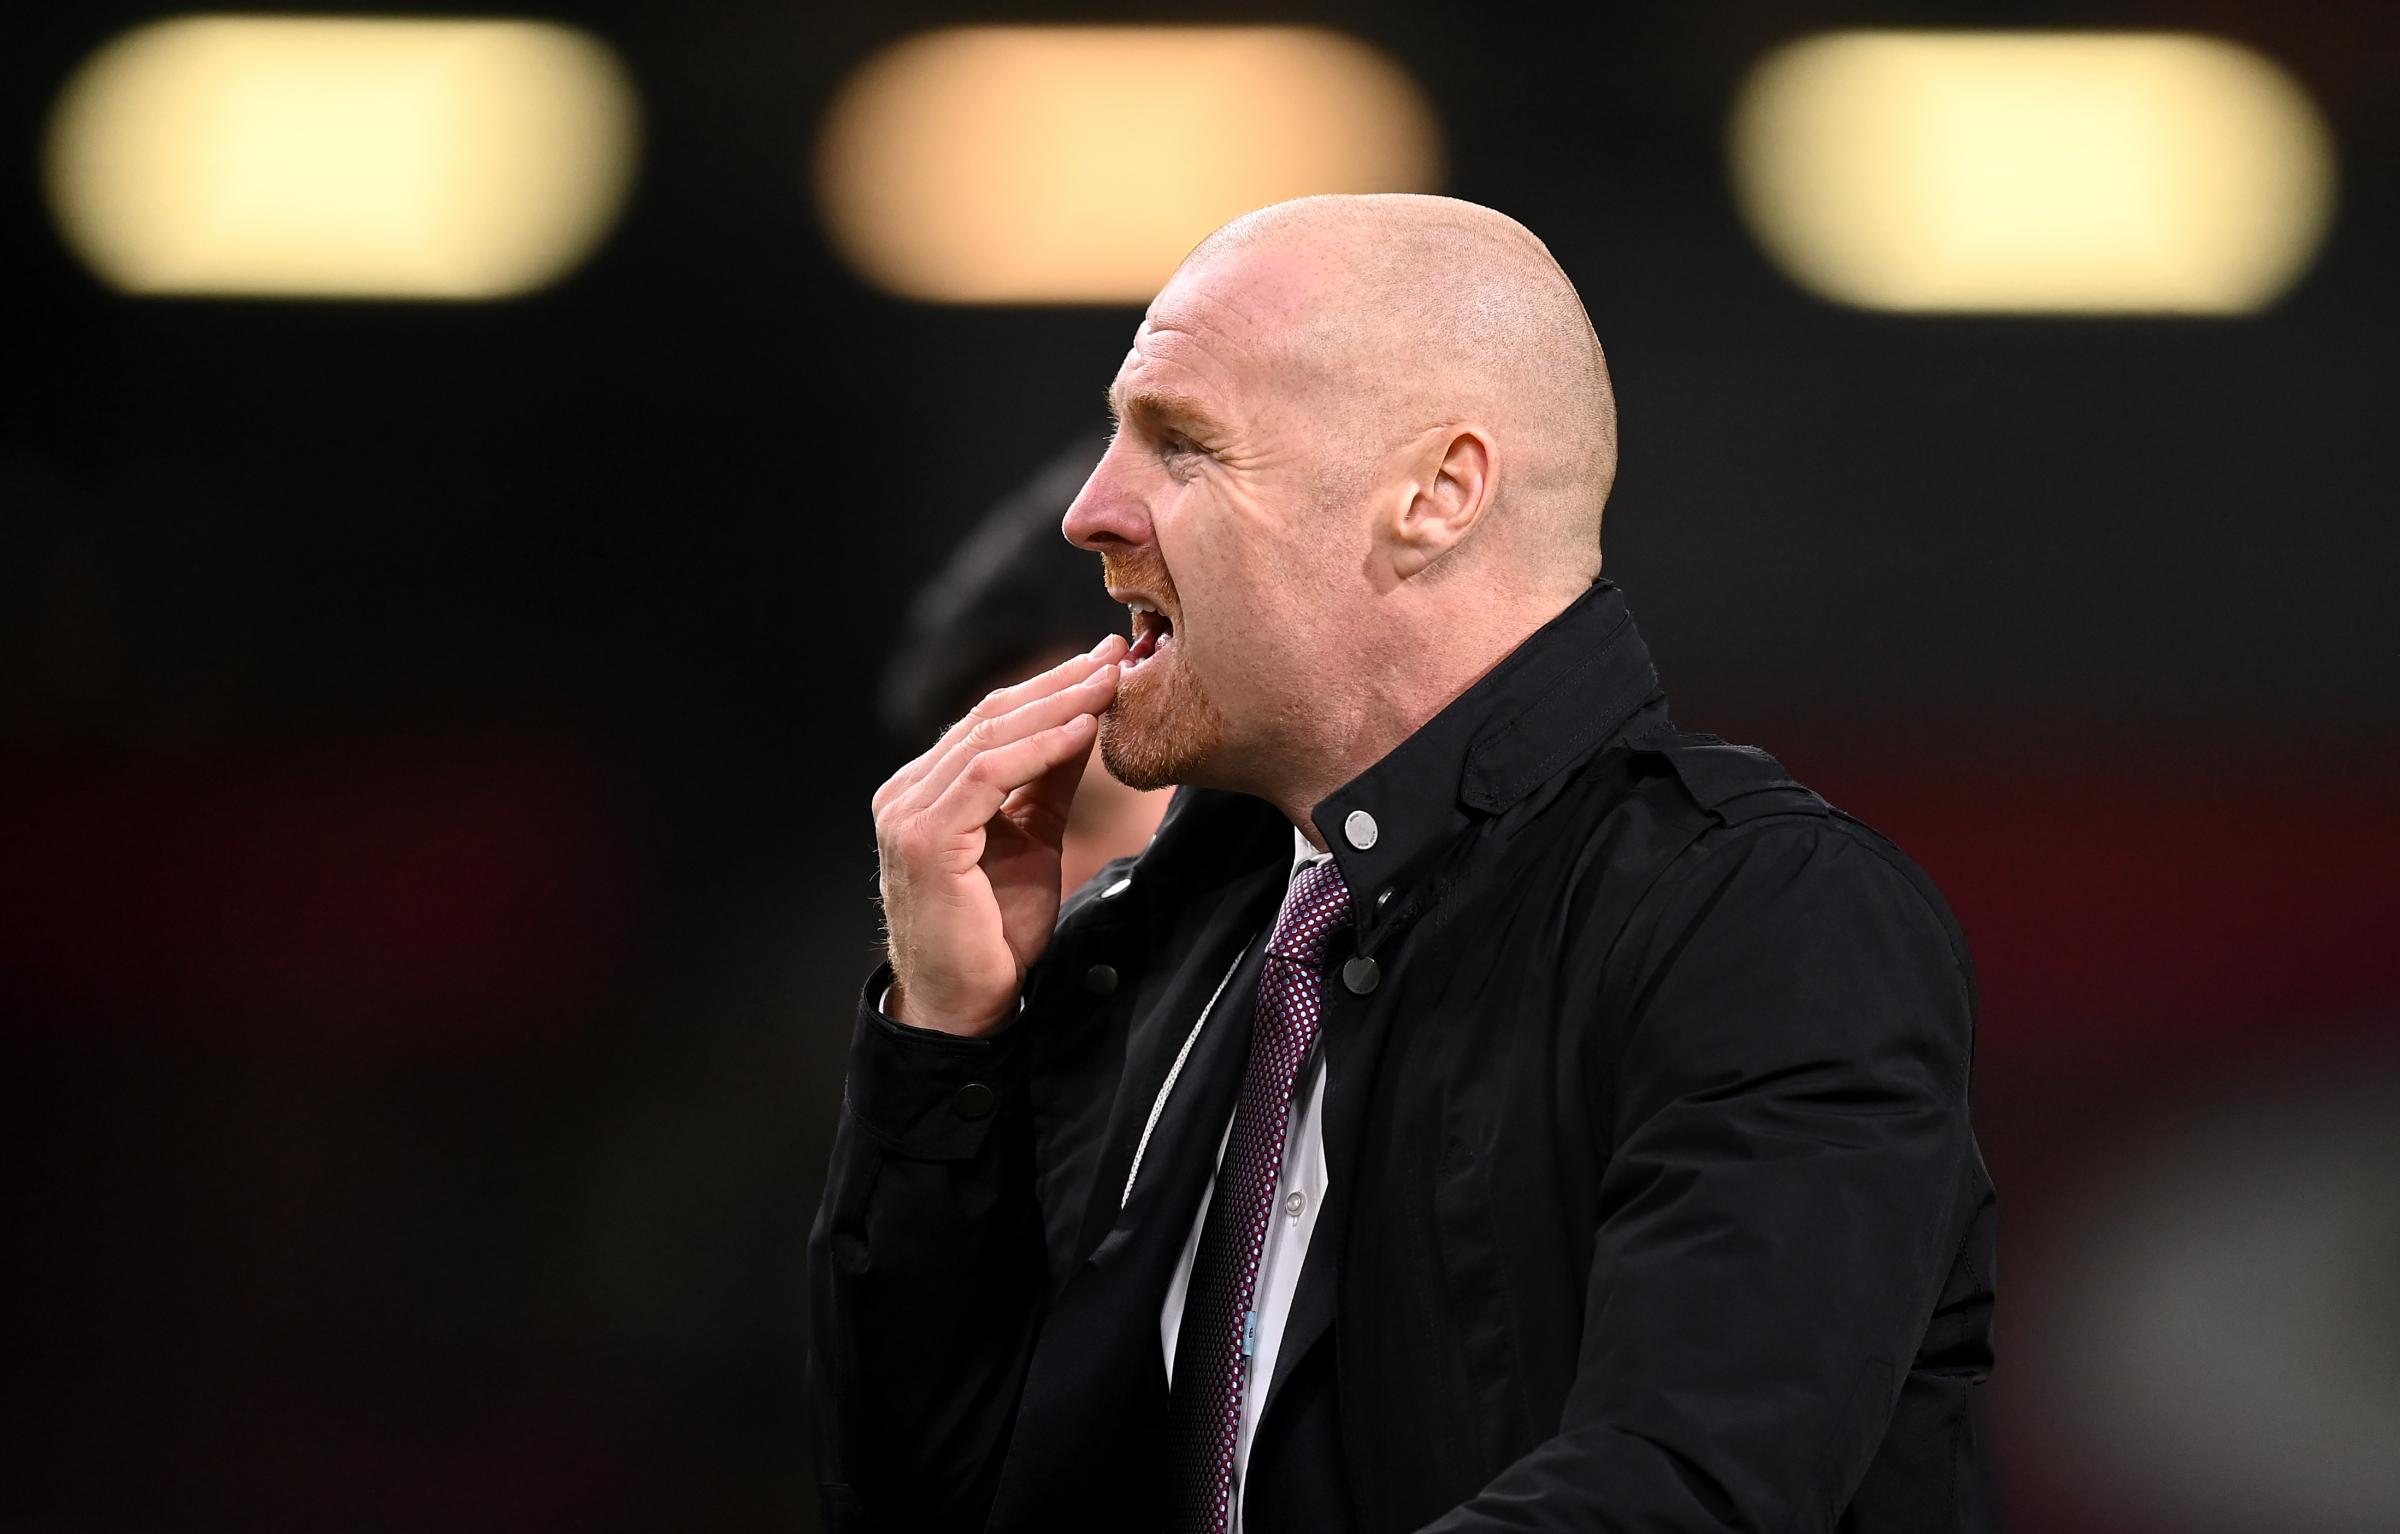 Burnley boss Sean Dyche reacts to latest takeover reports